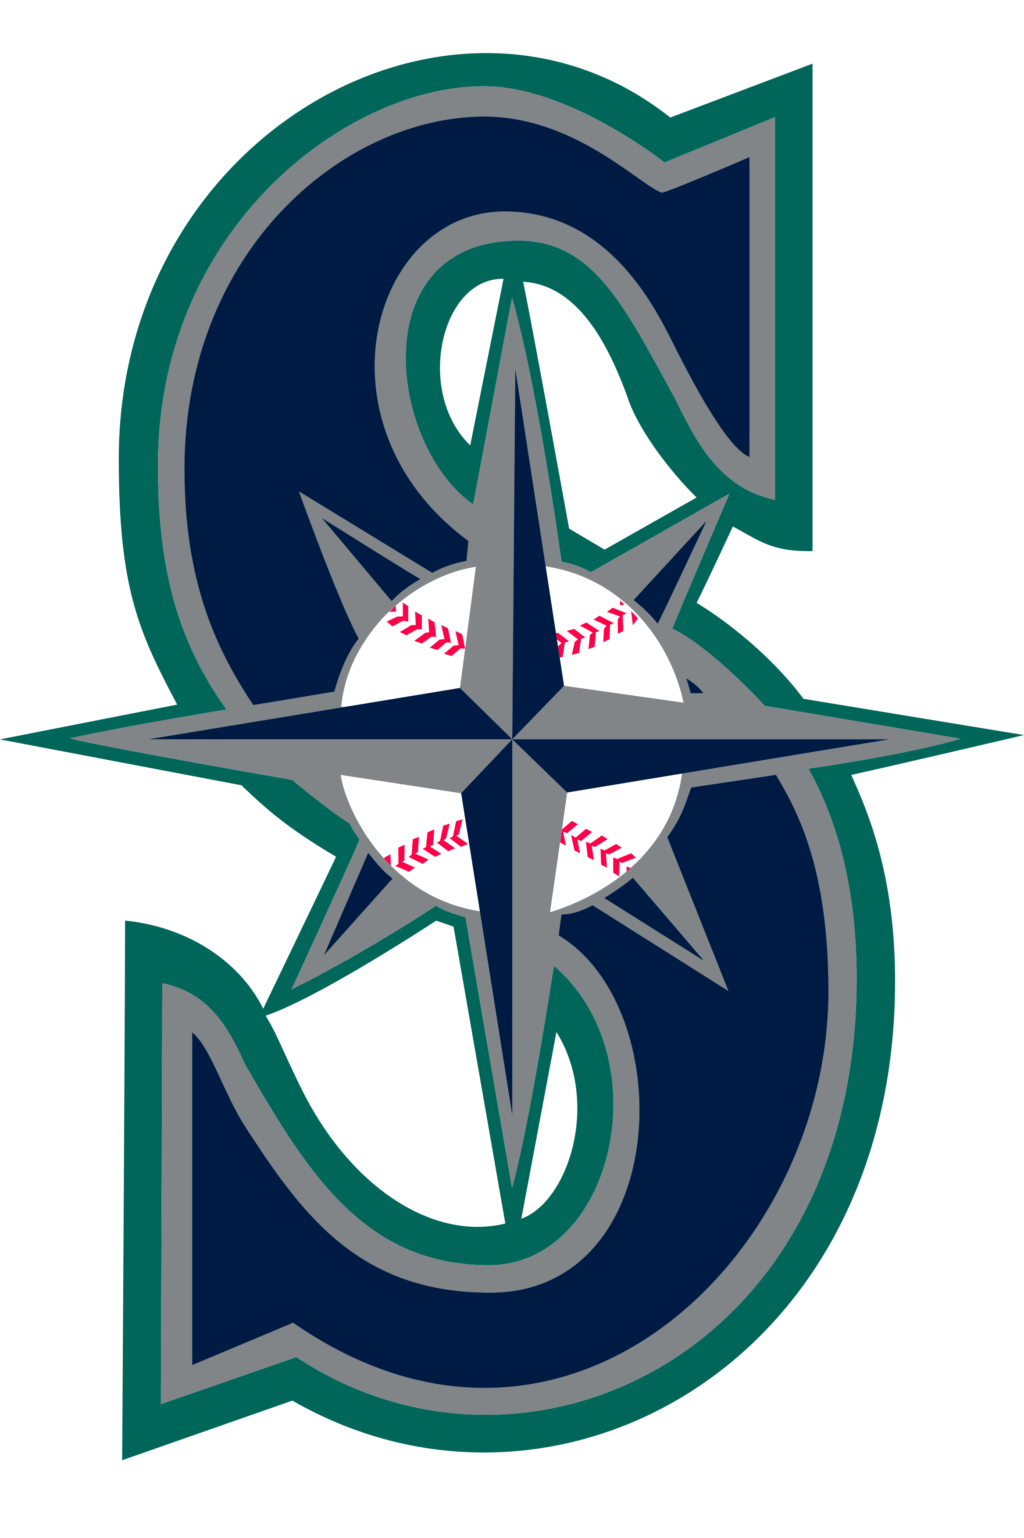 seattle mariners 10 MLB Seattle Mariners SVG, SVG Files For Silhouette, Seattle Mariners Files For Cricut, Seattle Mariners SVG, DXF, EPS, PNG Instant Download. Seattle Mariners SVG, SVG Files For Silhouette, Seattle Mariners Files For Cricut, Seattle Mariners SVG, DXF, EPS, PNG Instant Download.